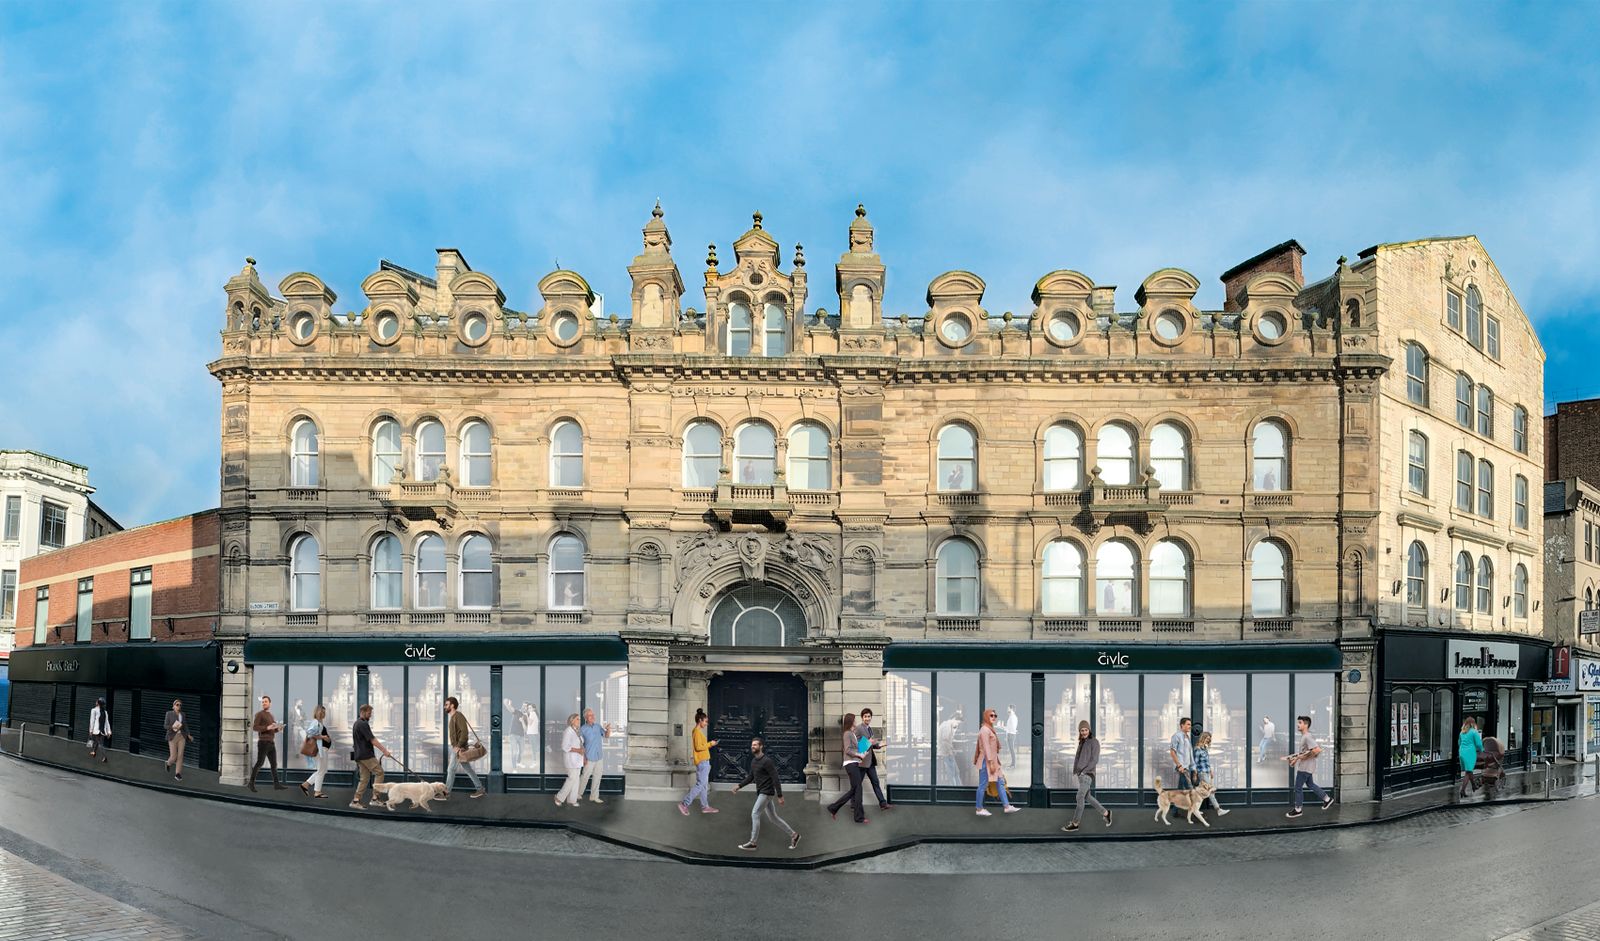 Work to start on £3.2M redevelopment of Grade II Listed Arts Centre, Barnsley Civic